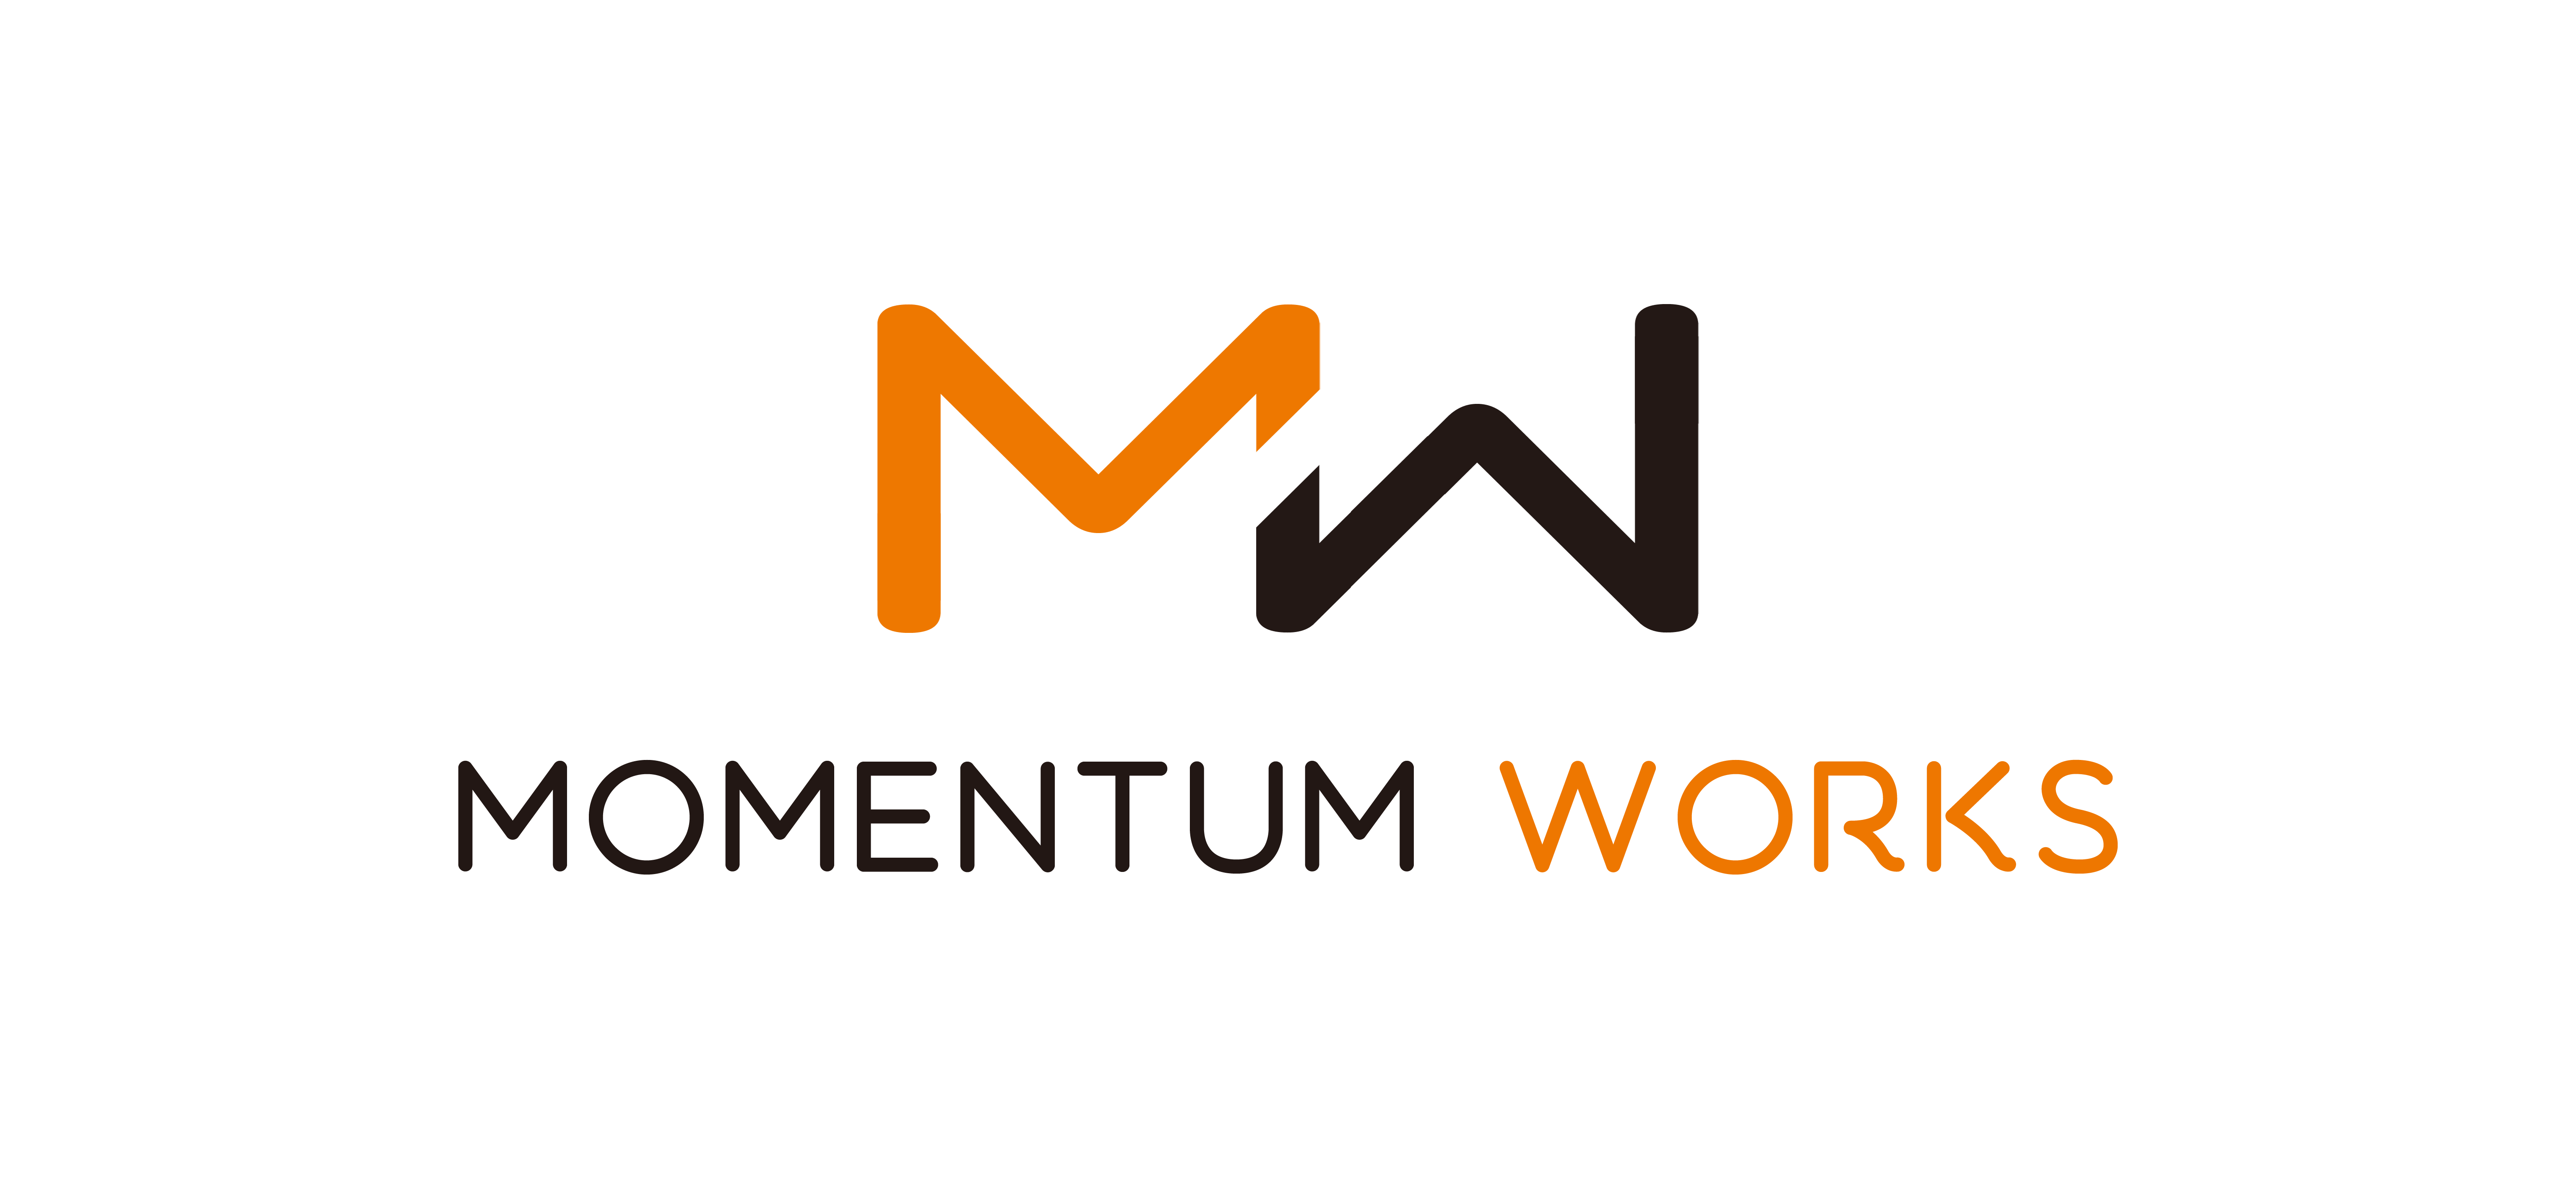 Momentum Works is changing its logo.